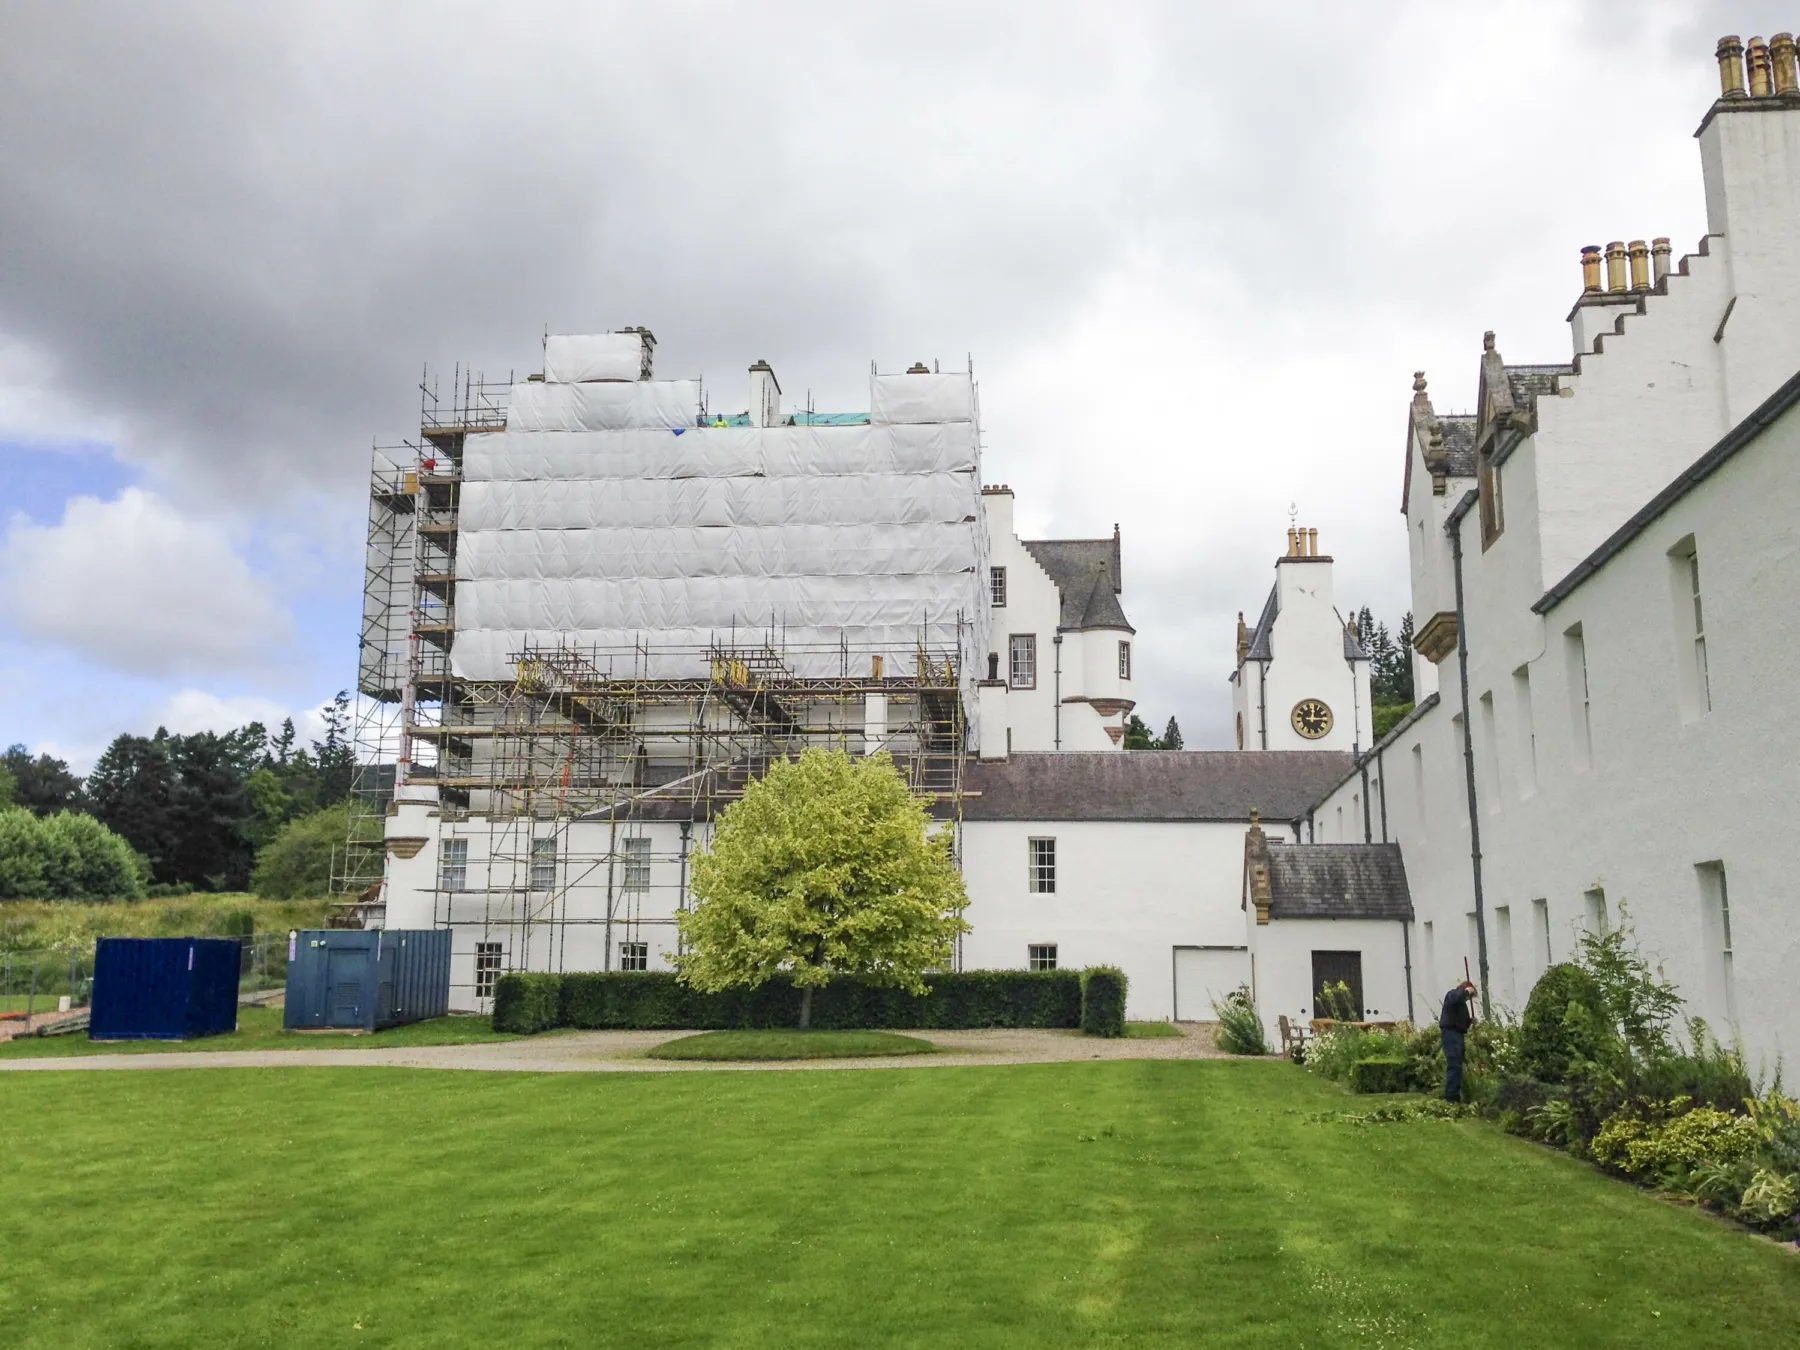 Works at Blair Castle, Perthsire, Scotland. Scaffoding on the upper storeys and roof of one section of the building to provide access for conservation and repair works on this listed building.